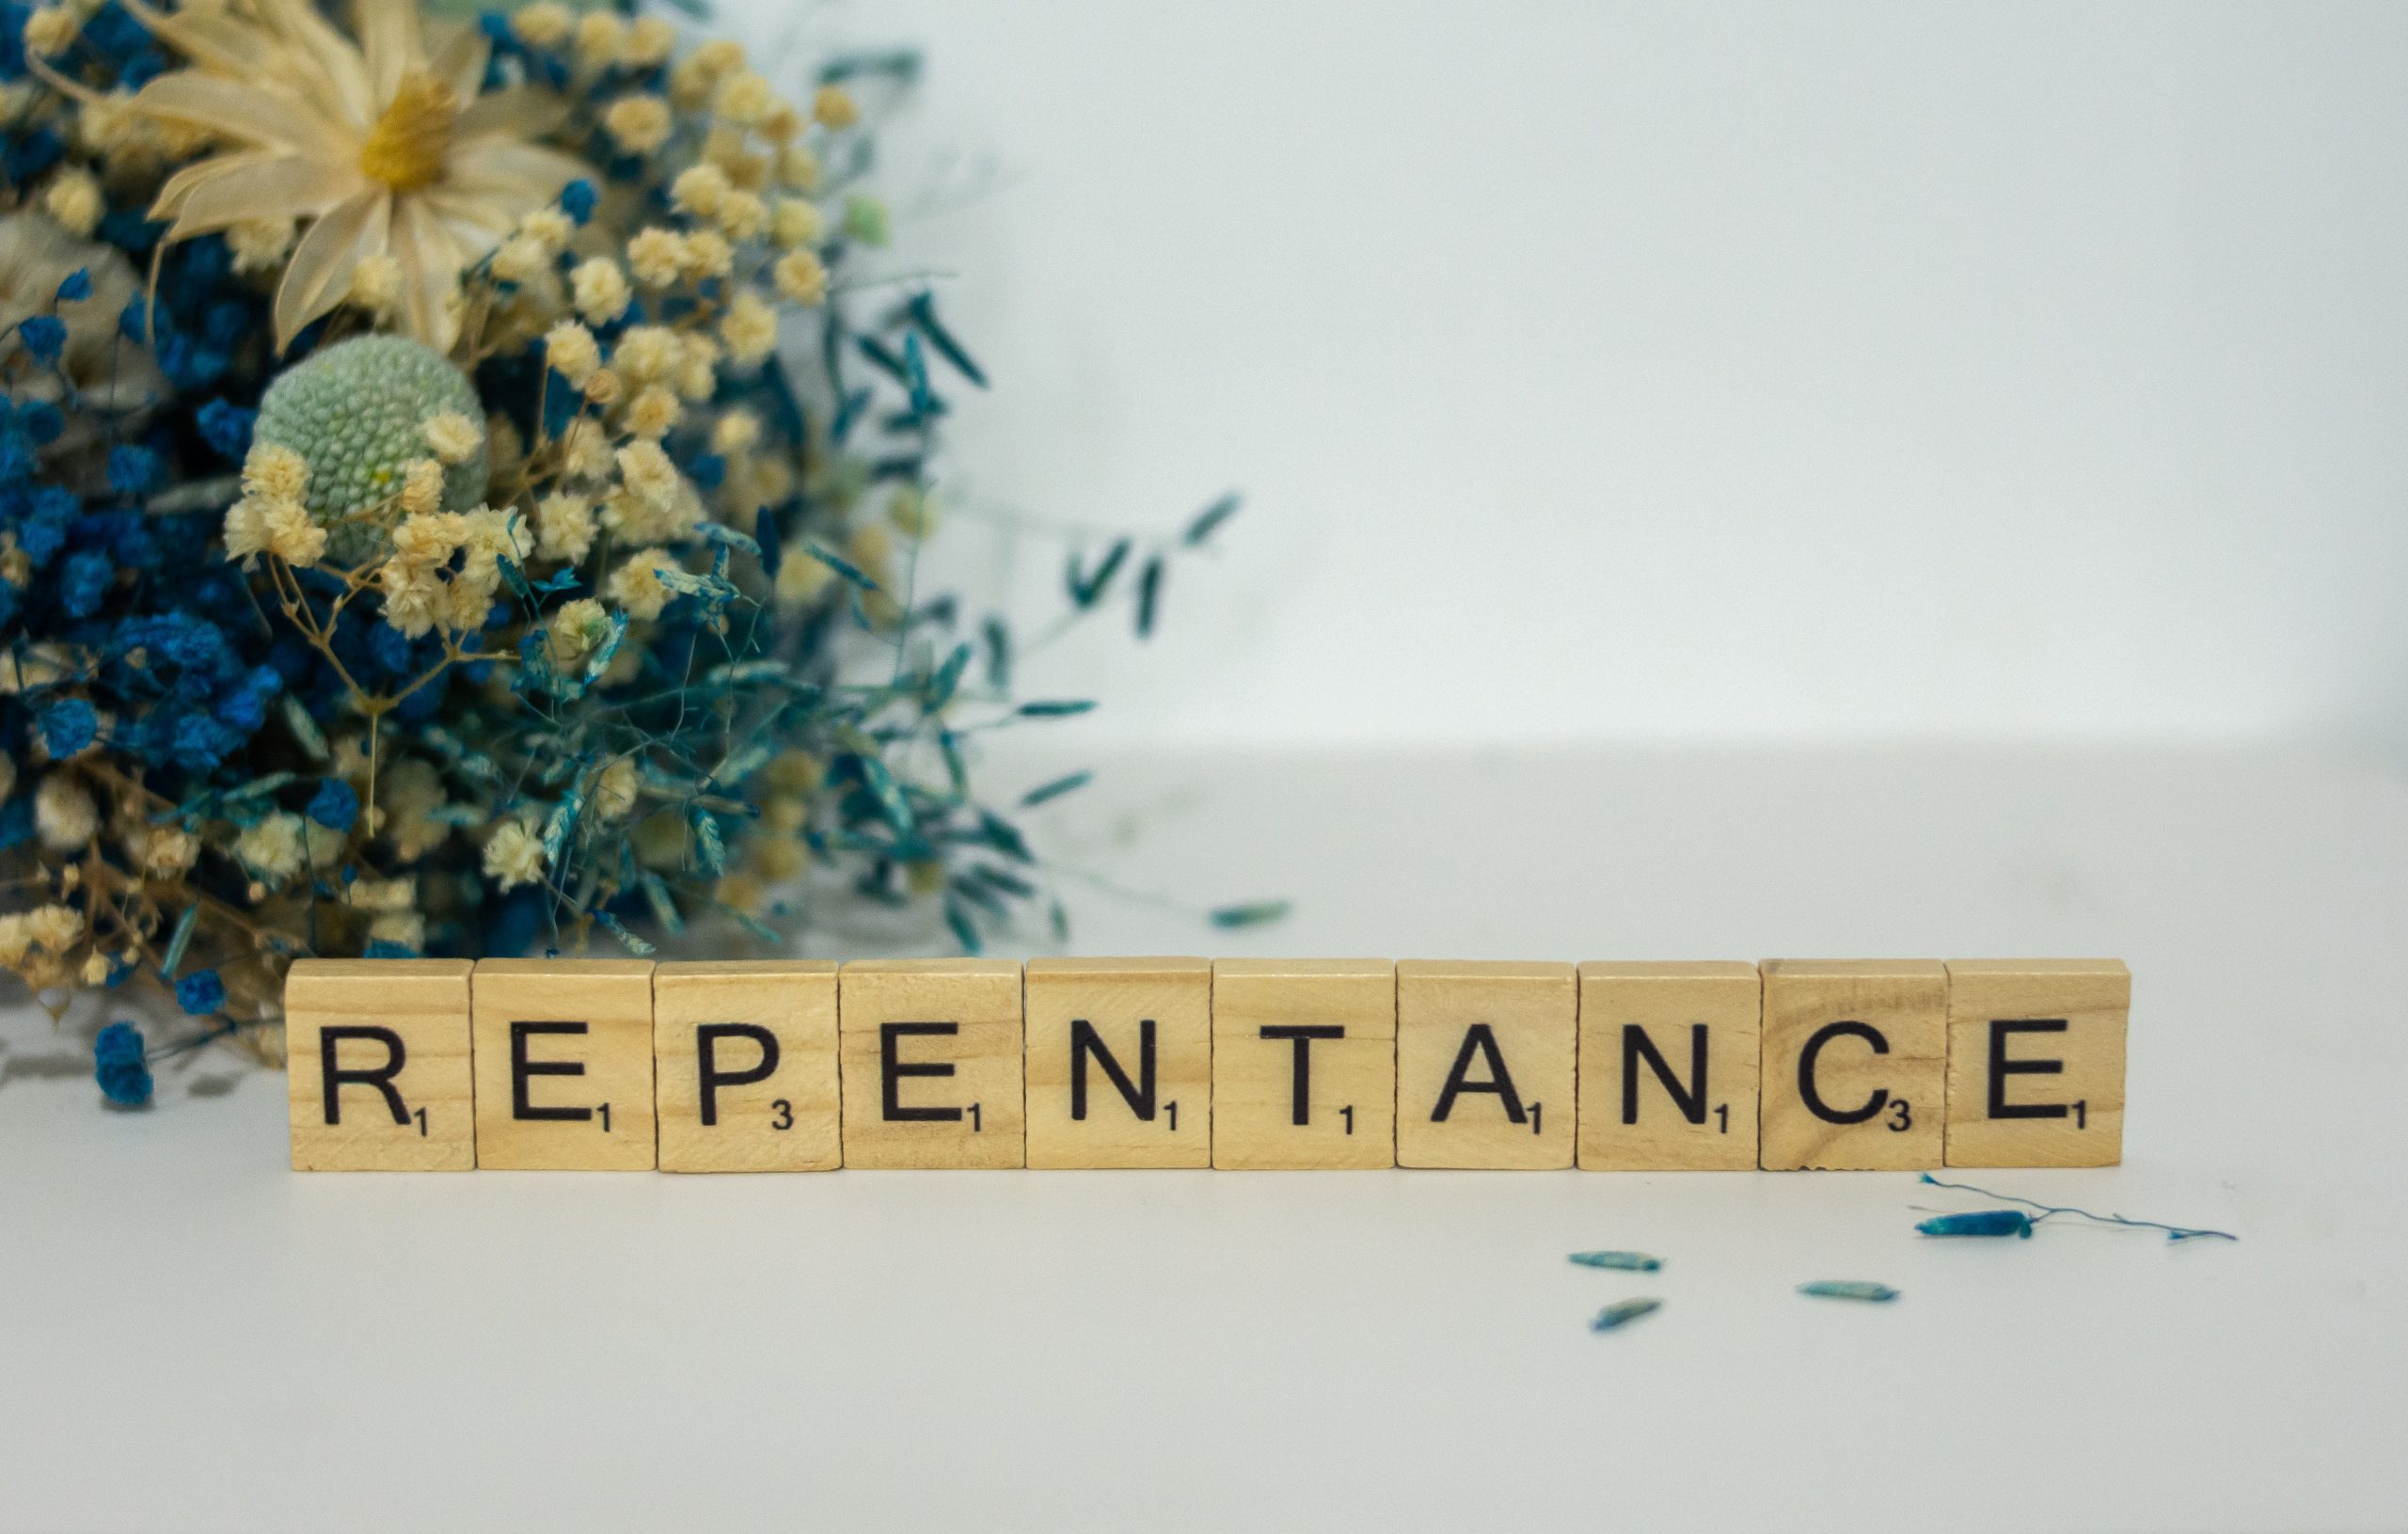 Second Week of Lent: Reflection on Repentance